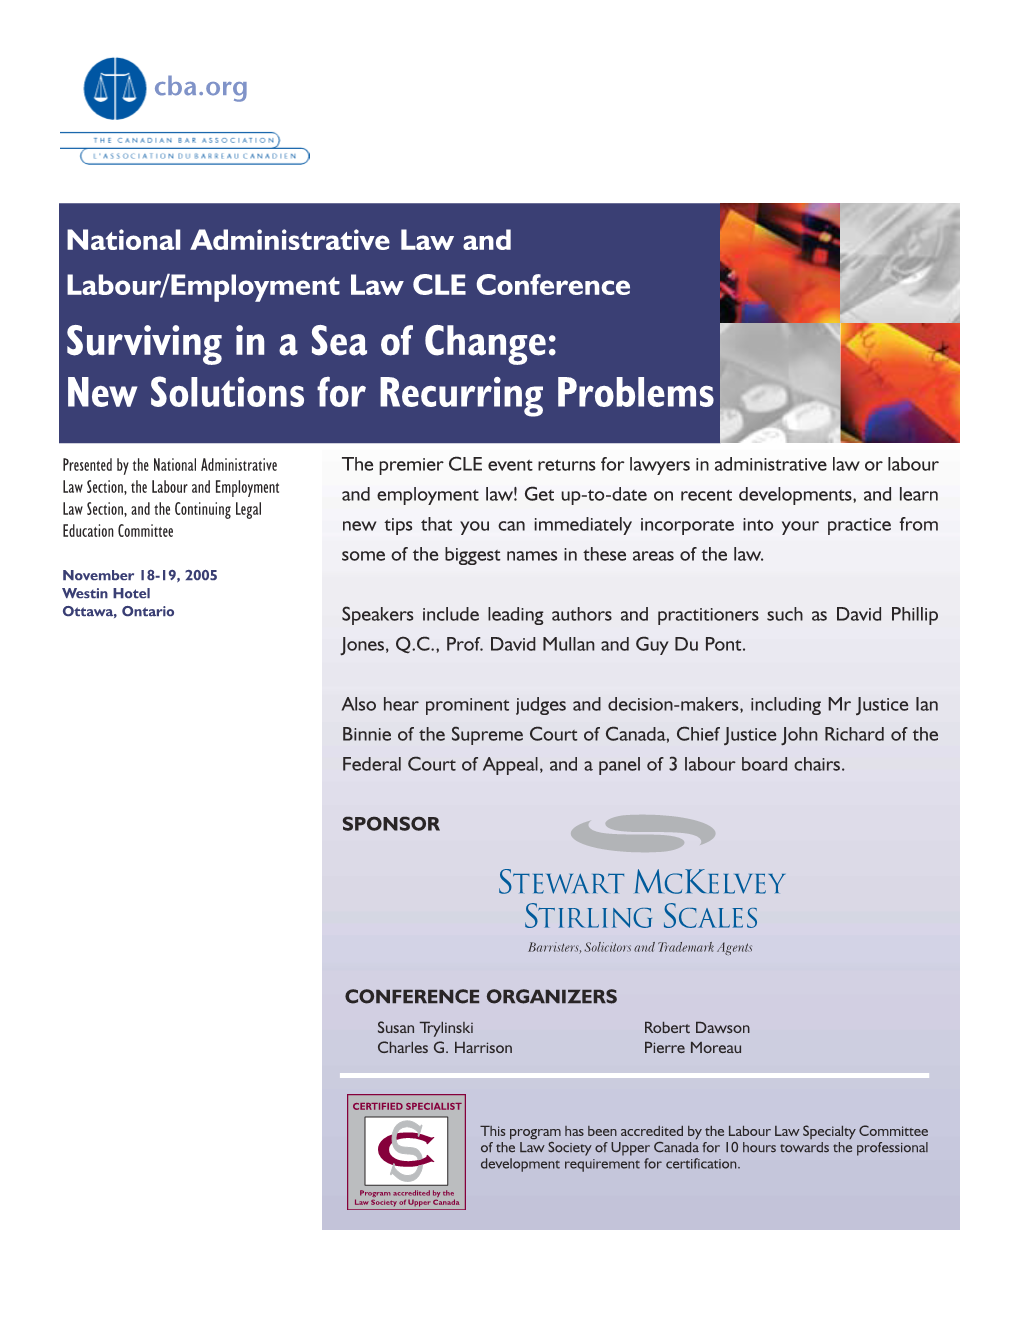 Surviving in a Sea of Change: New Solutions for Recurring Problems